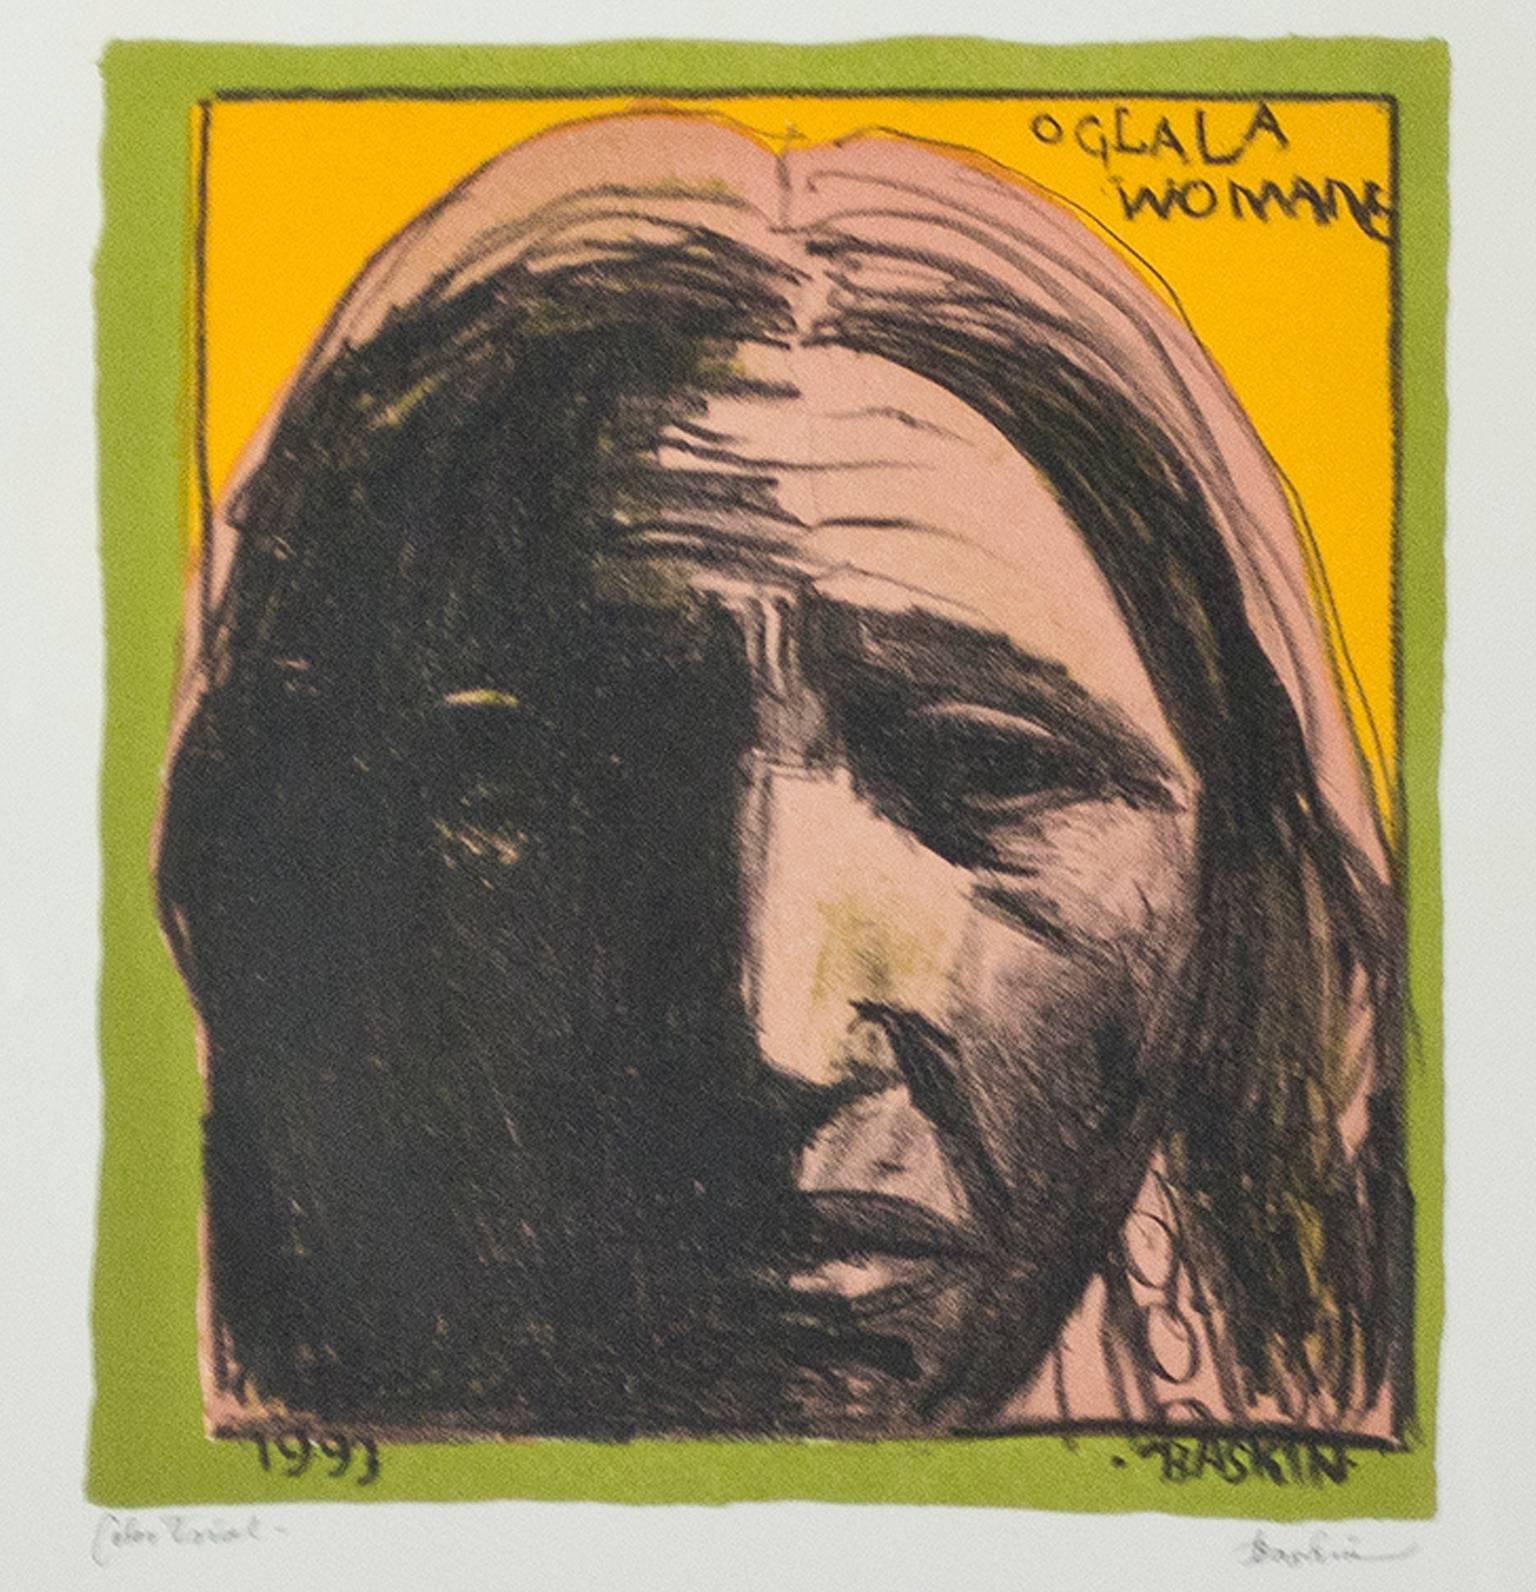 "Oglala Woman" is an original color lithograph trial proof by Leonard Baskin. This was a proof before publication. It depicts the shadowed face of a woman from the Oglala Sioux tribe.

9" x 8" art
20 5/8" x 20" frame

Born in 1922 in New Brunswick,